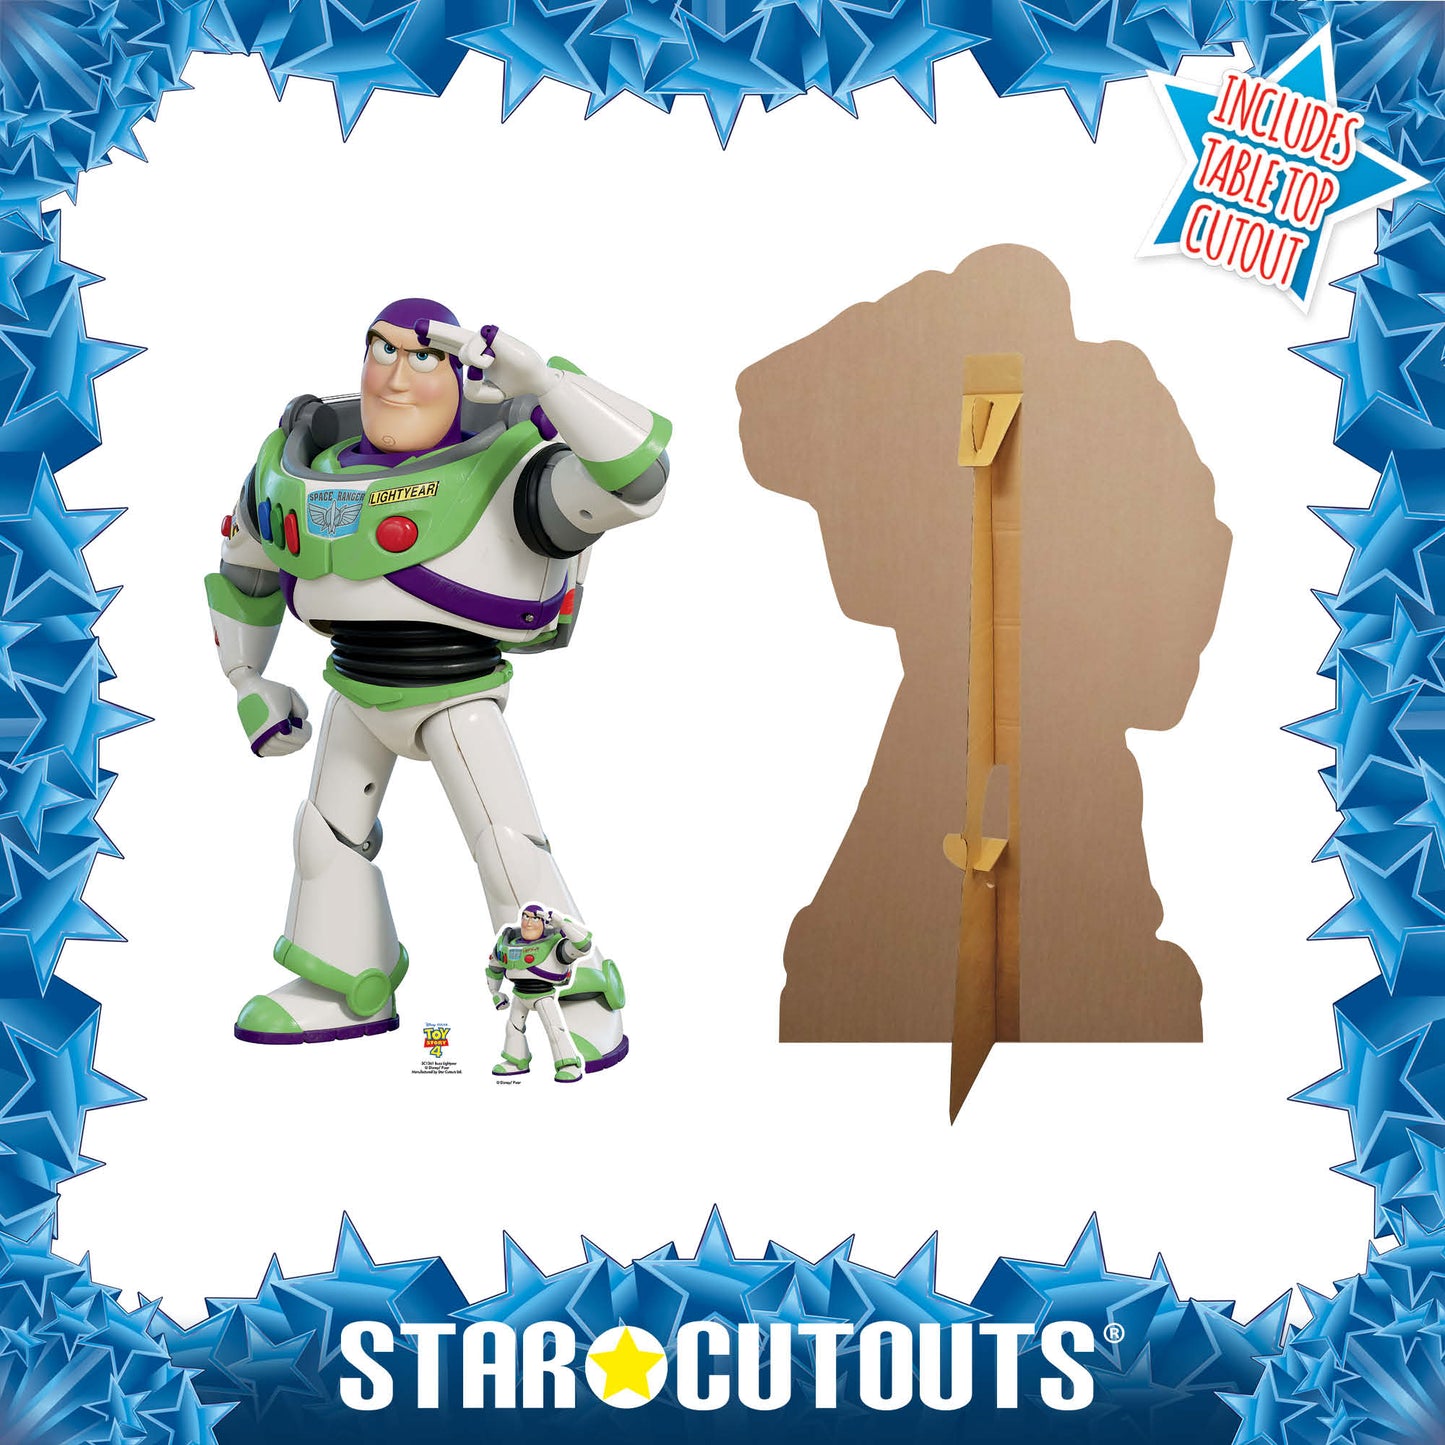 SC1361 Buzz Lightyear Saluting Toy Story 4 Cardboard Cut Out Height 129cm